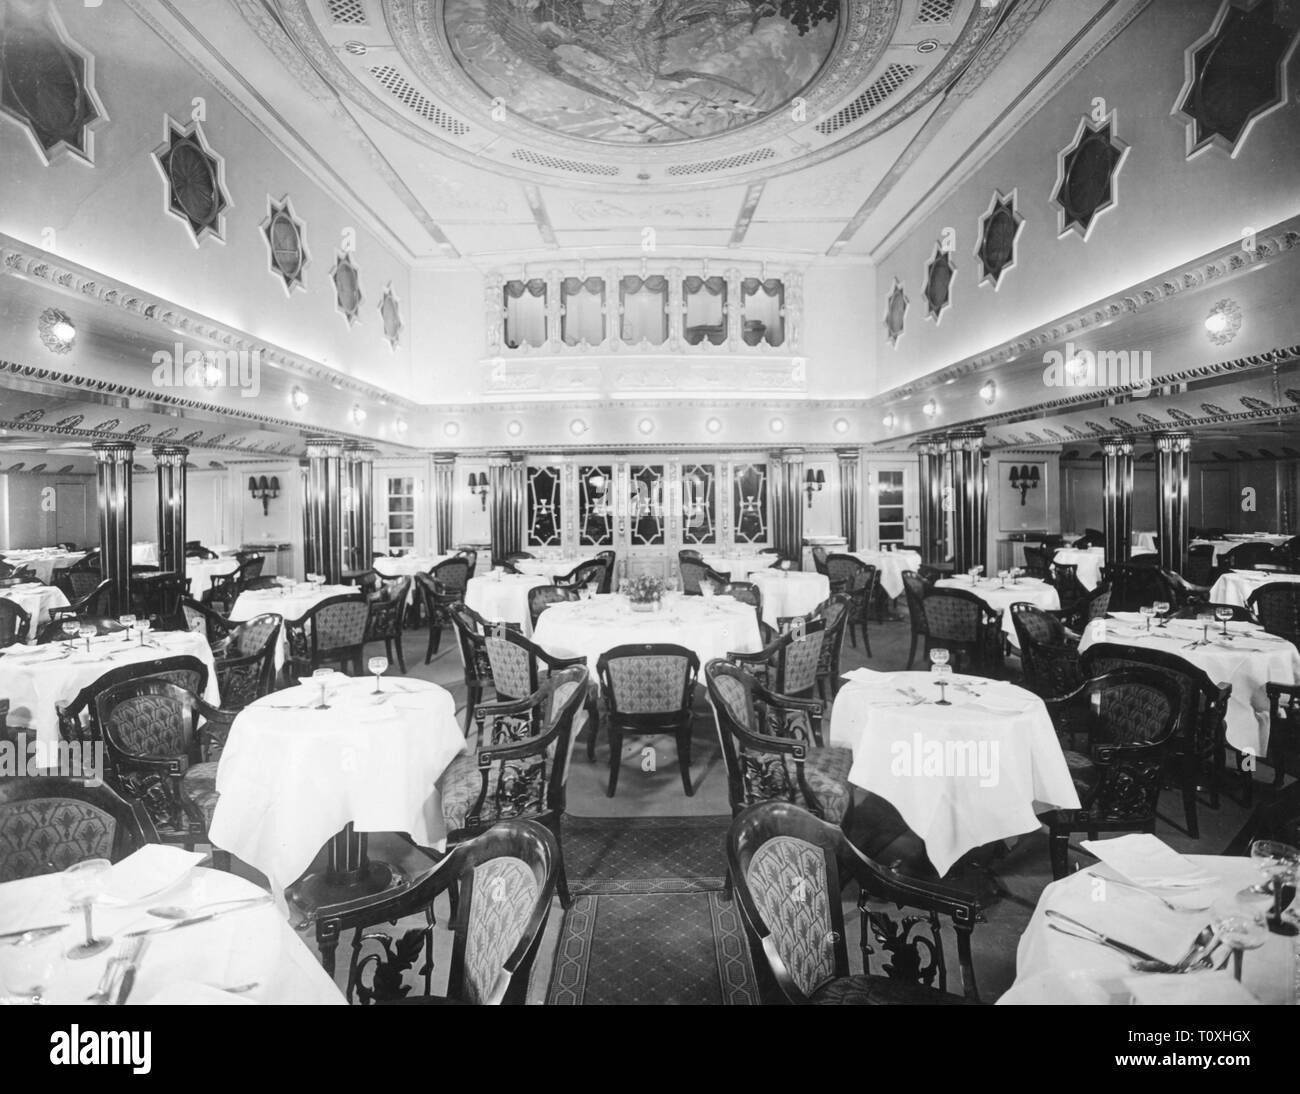 transport / transportation, navigation, steamships, inside, passenger ship 'Albert Ballin' of the HAPAG, dining hall, 1920s, Additional-Rights-Clearance-Info-Not-Available Stock Photo